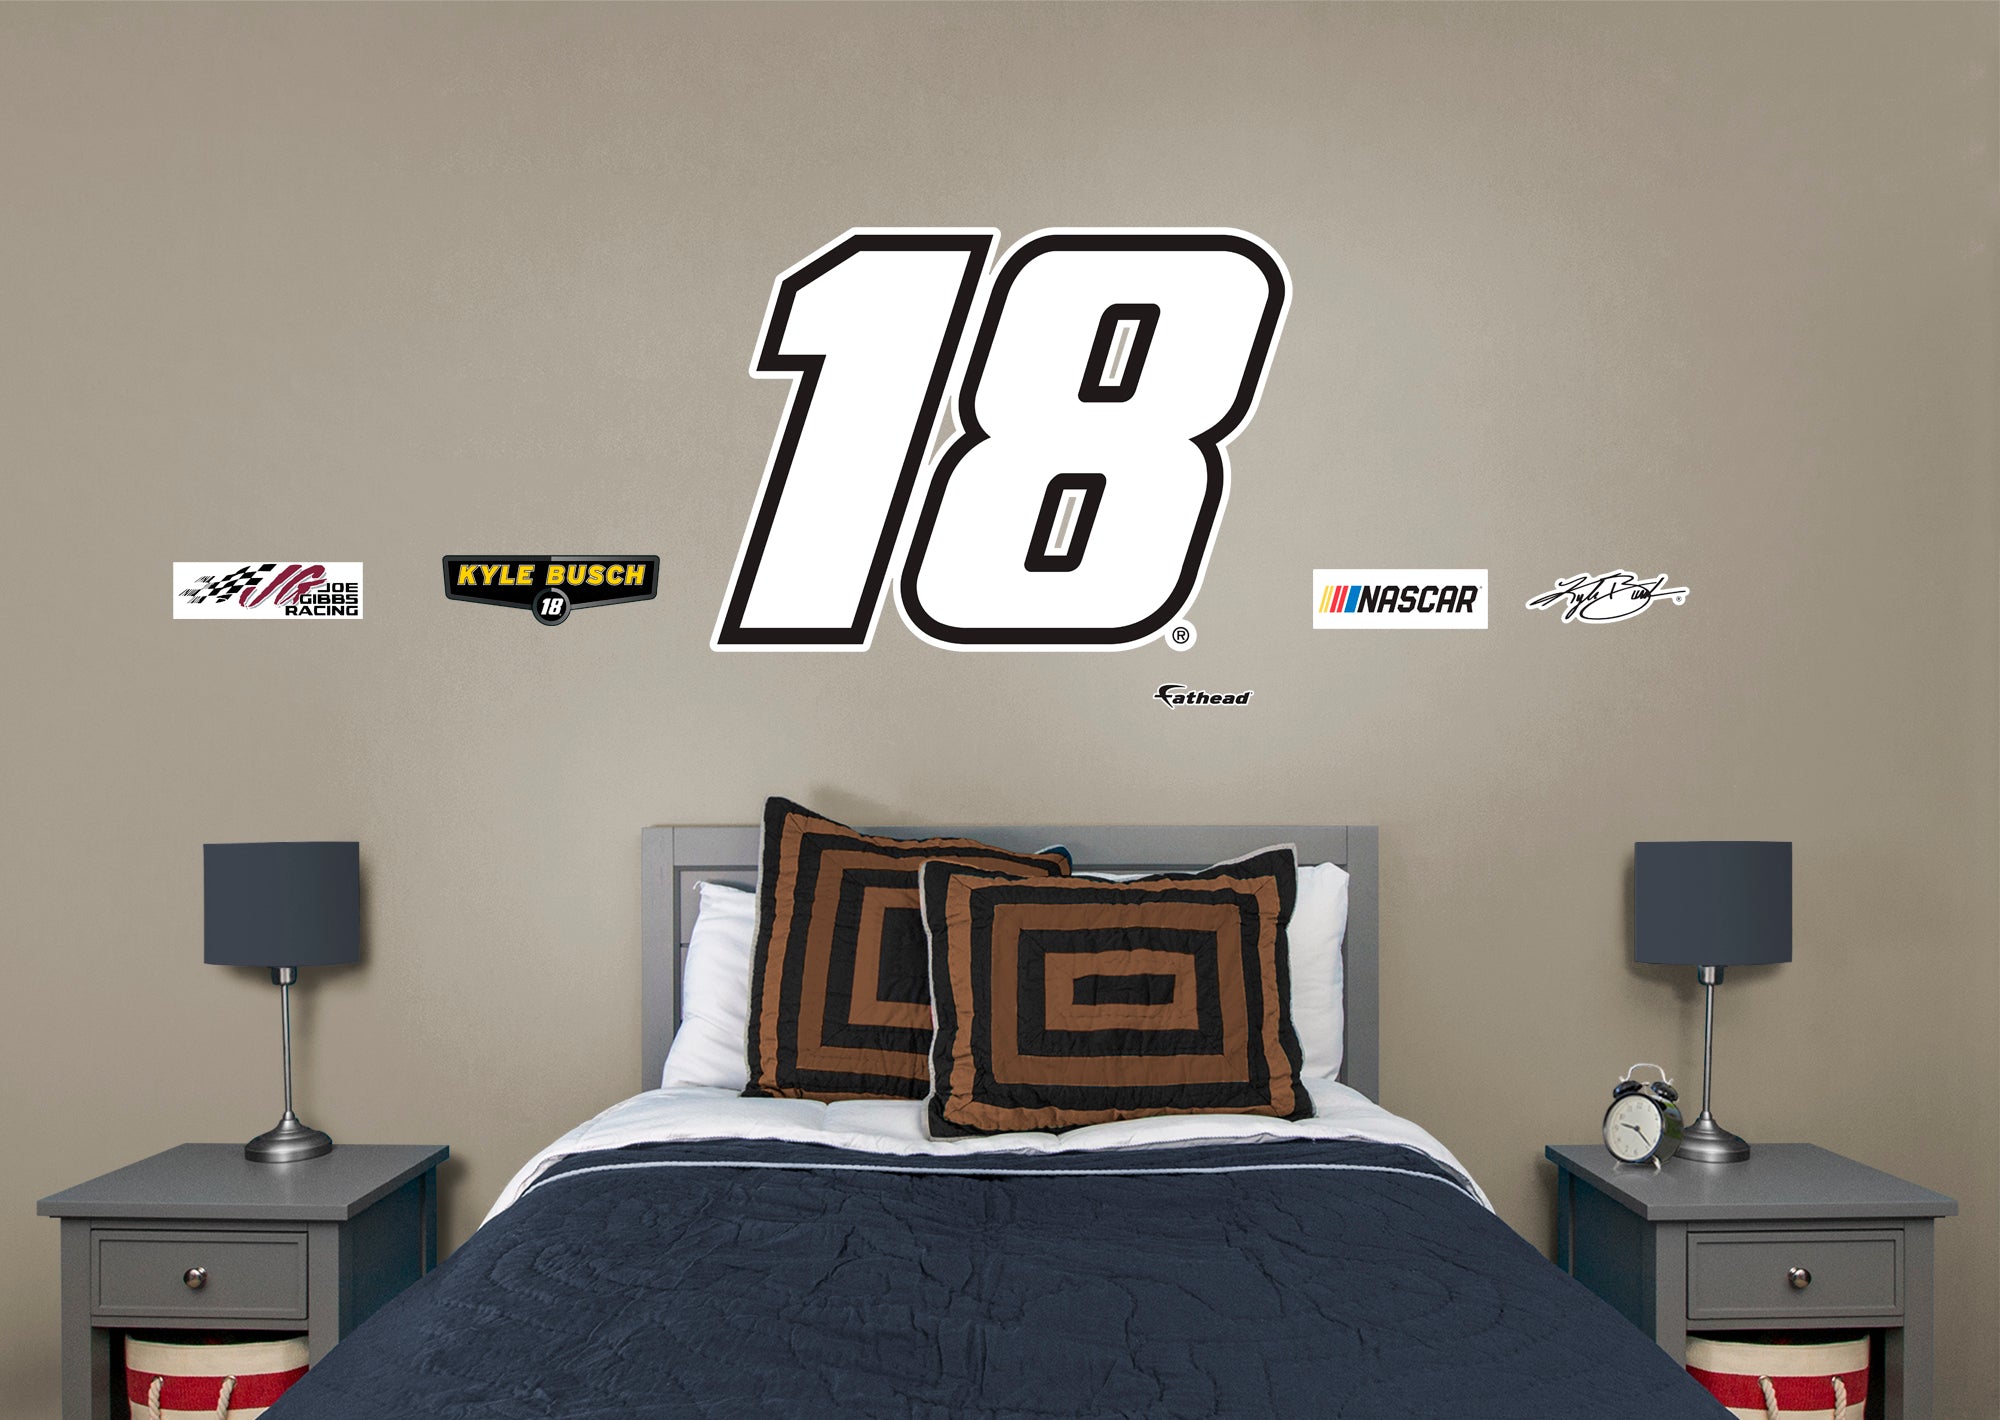 Kyle Busch 2021 #18 Logo - Officially Licensed NASCAR Removable Wall Decal Giant Logo + 5 Decals (45"W x 33"H) by Fathead | Viny